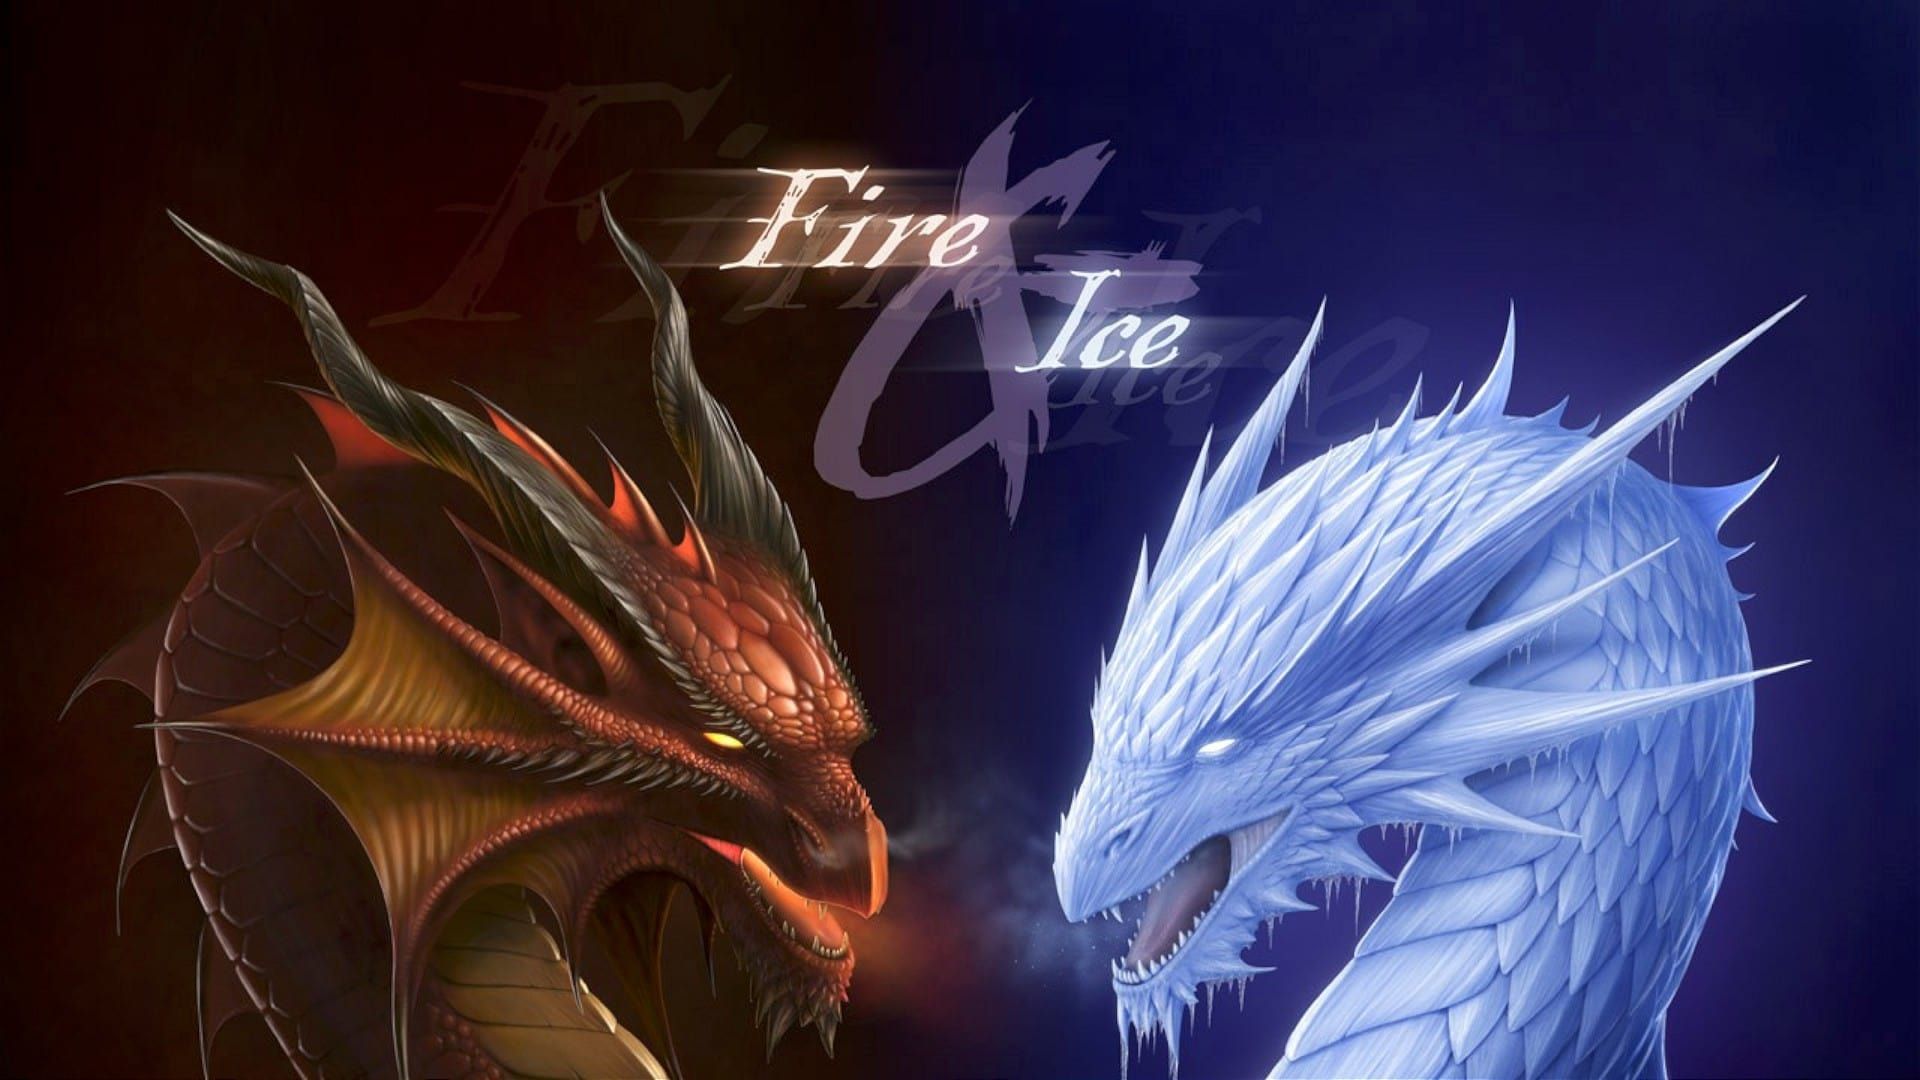 Dragons: Fire & Ice background